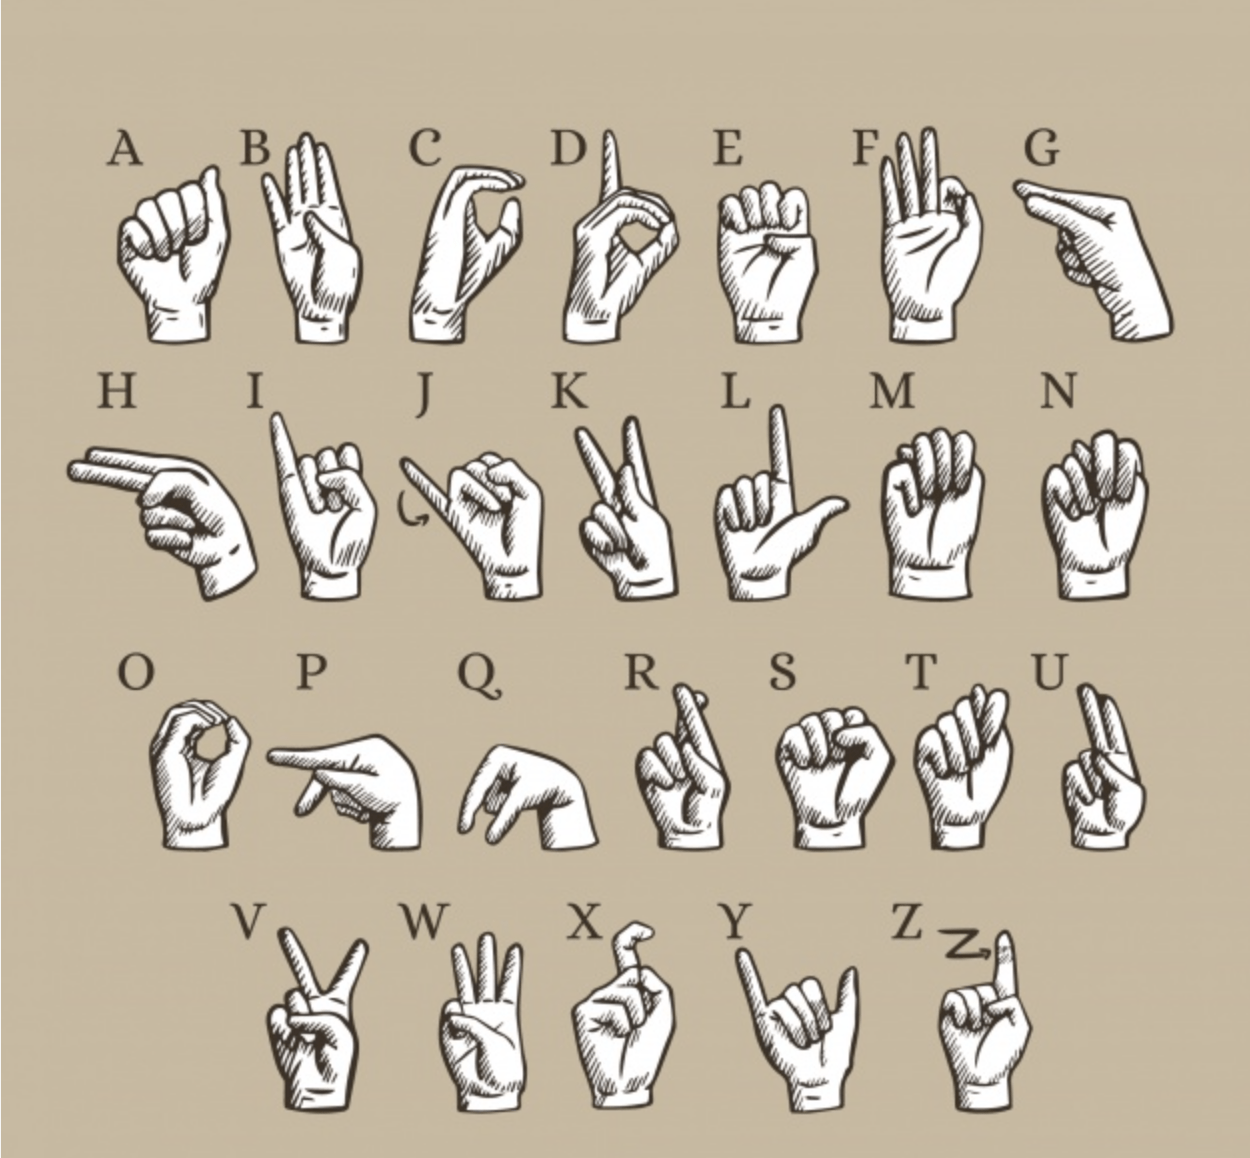 Sign language can be the universal language of the future.